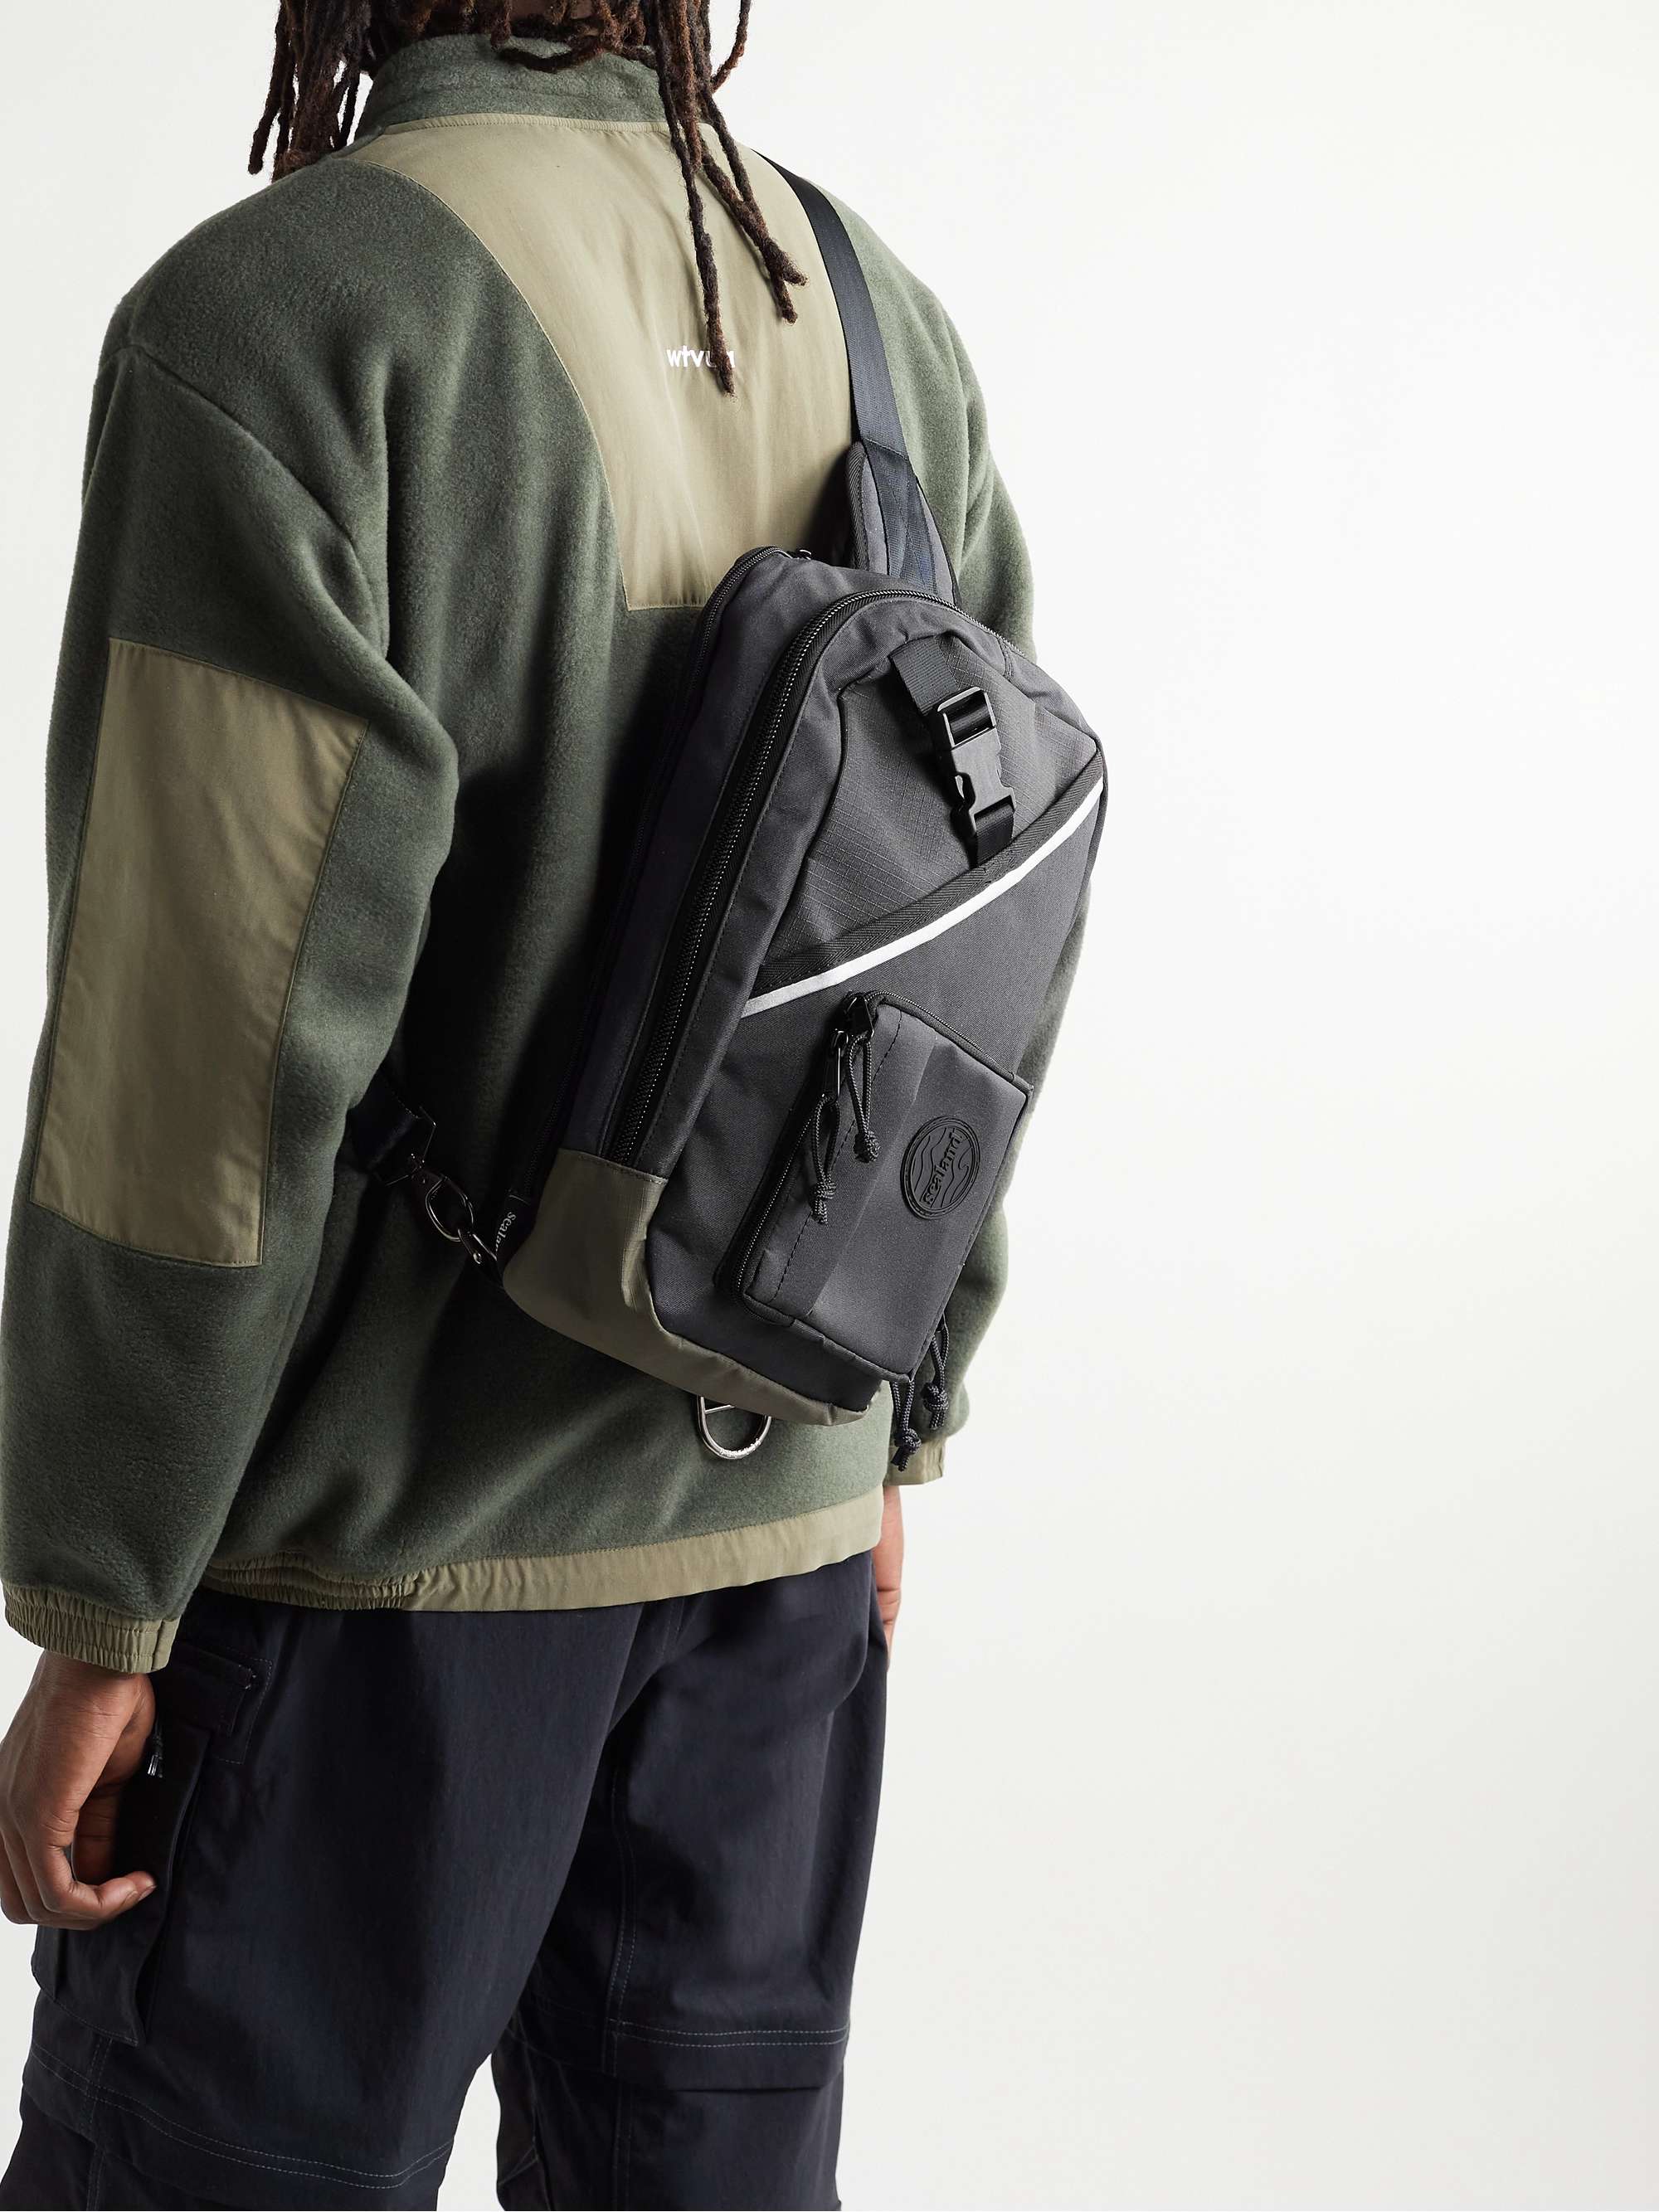 SEALAND GEAR Bloc Colour-Block Upcycled Canvas and Ripstop Sling Backpack